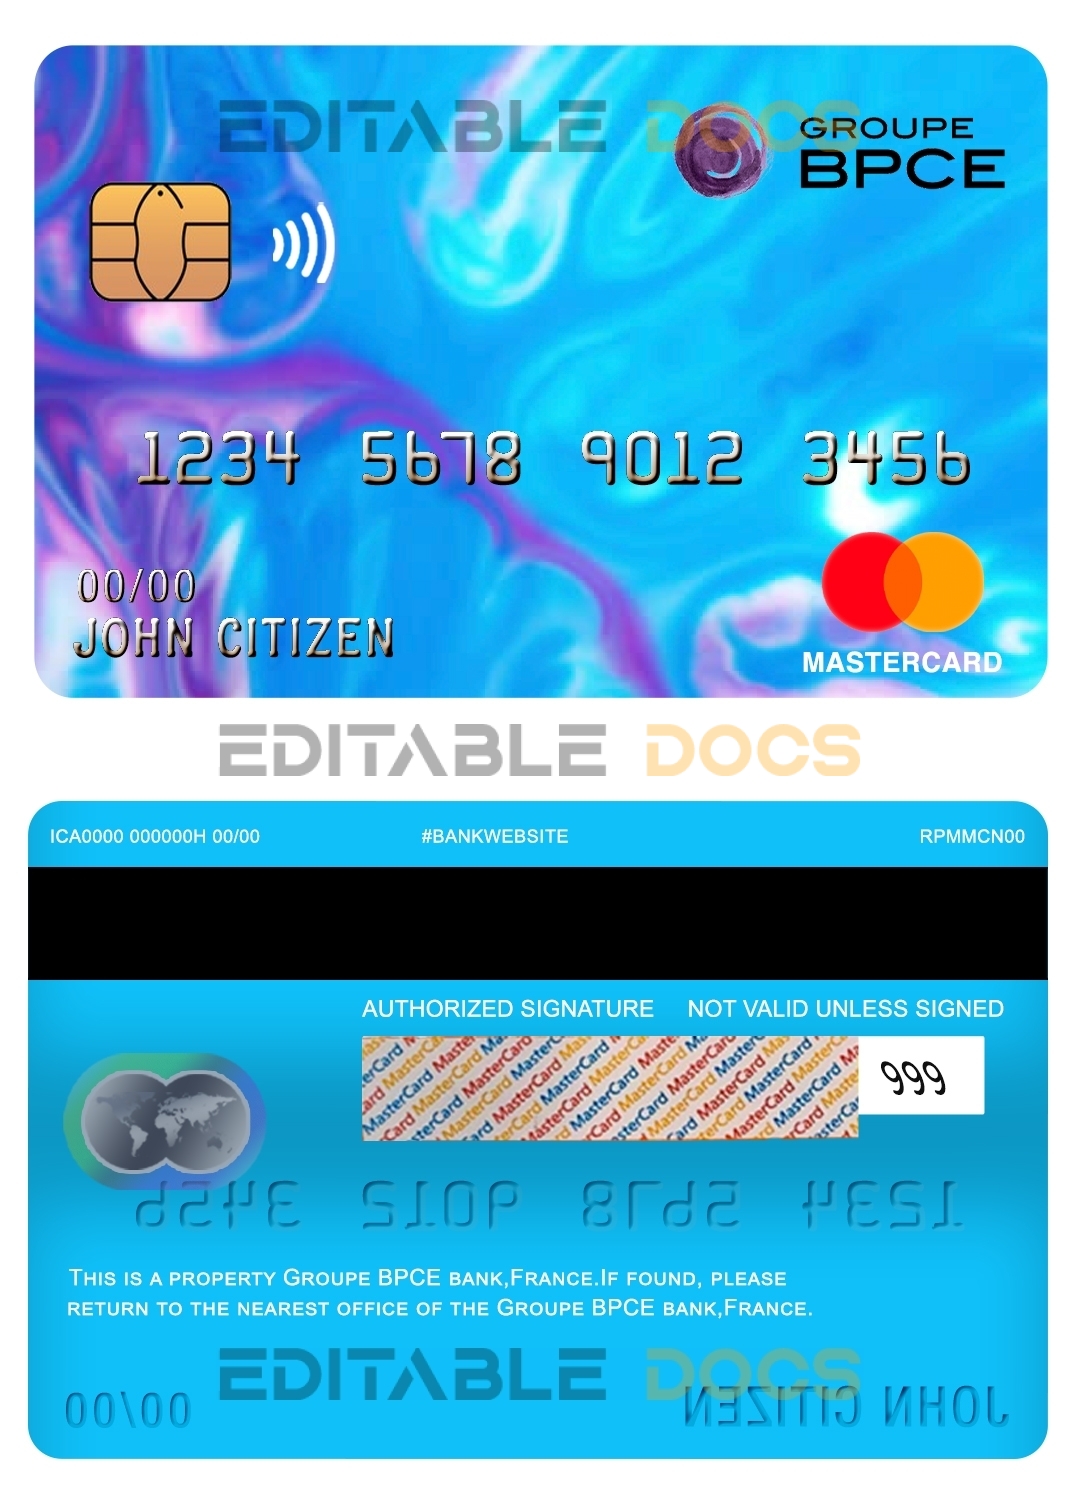 Fillable France Groupe BPCE bank mastercard Templates | Layer-Based PSD